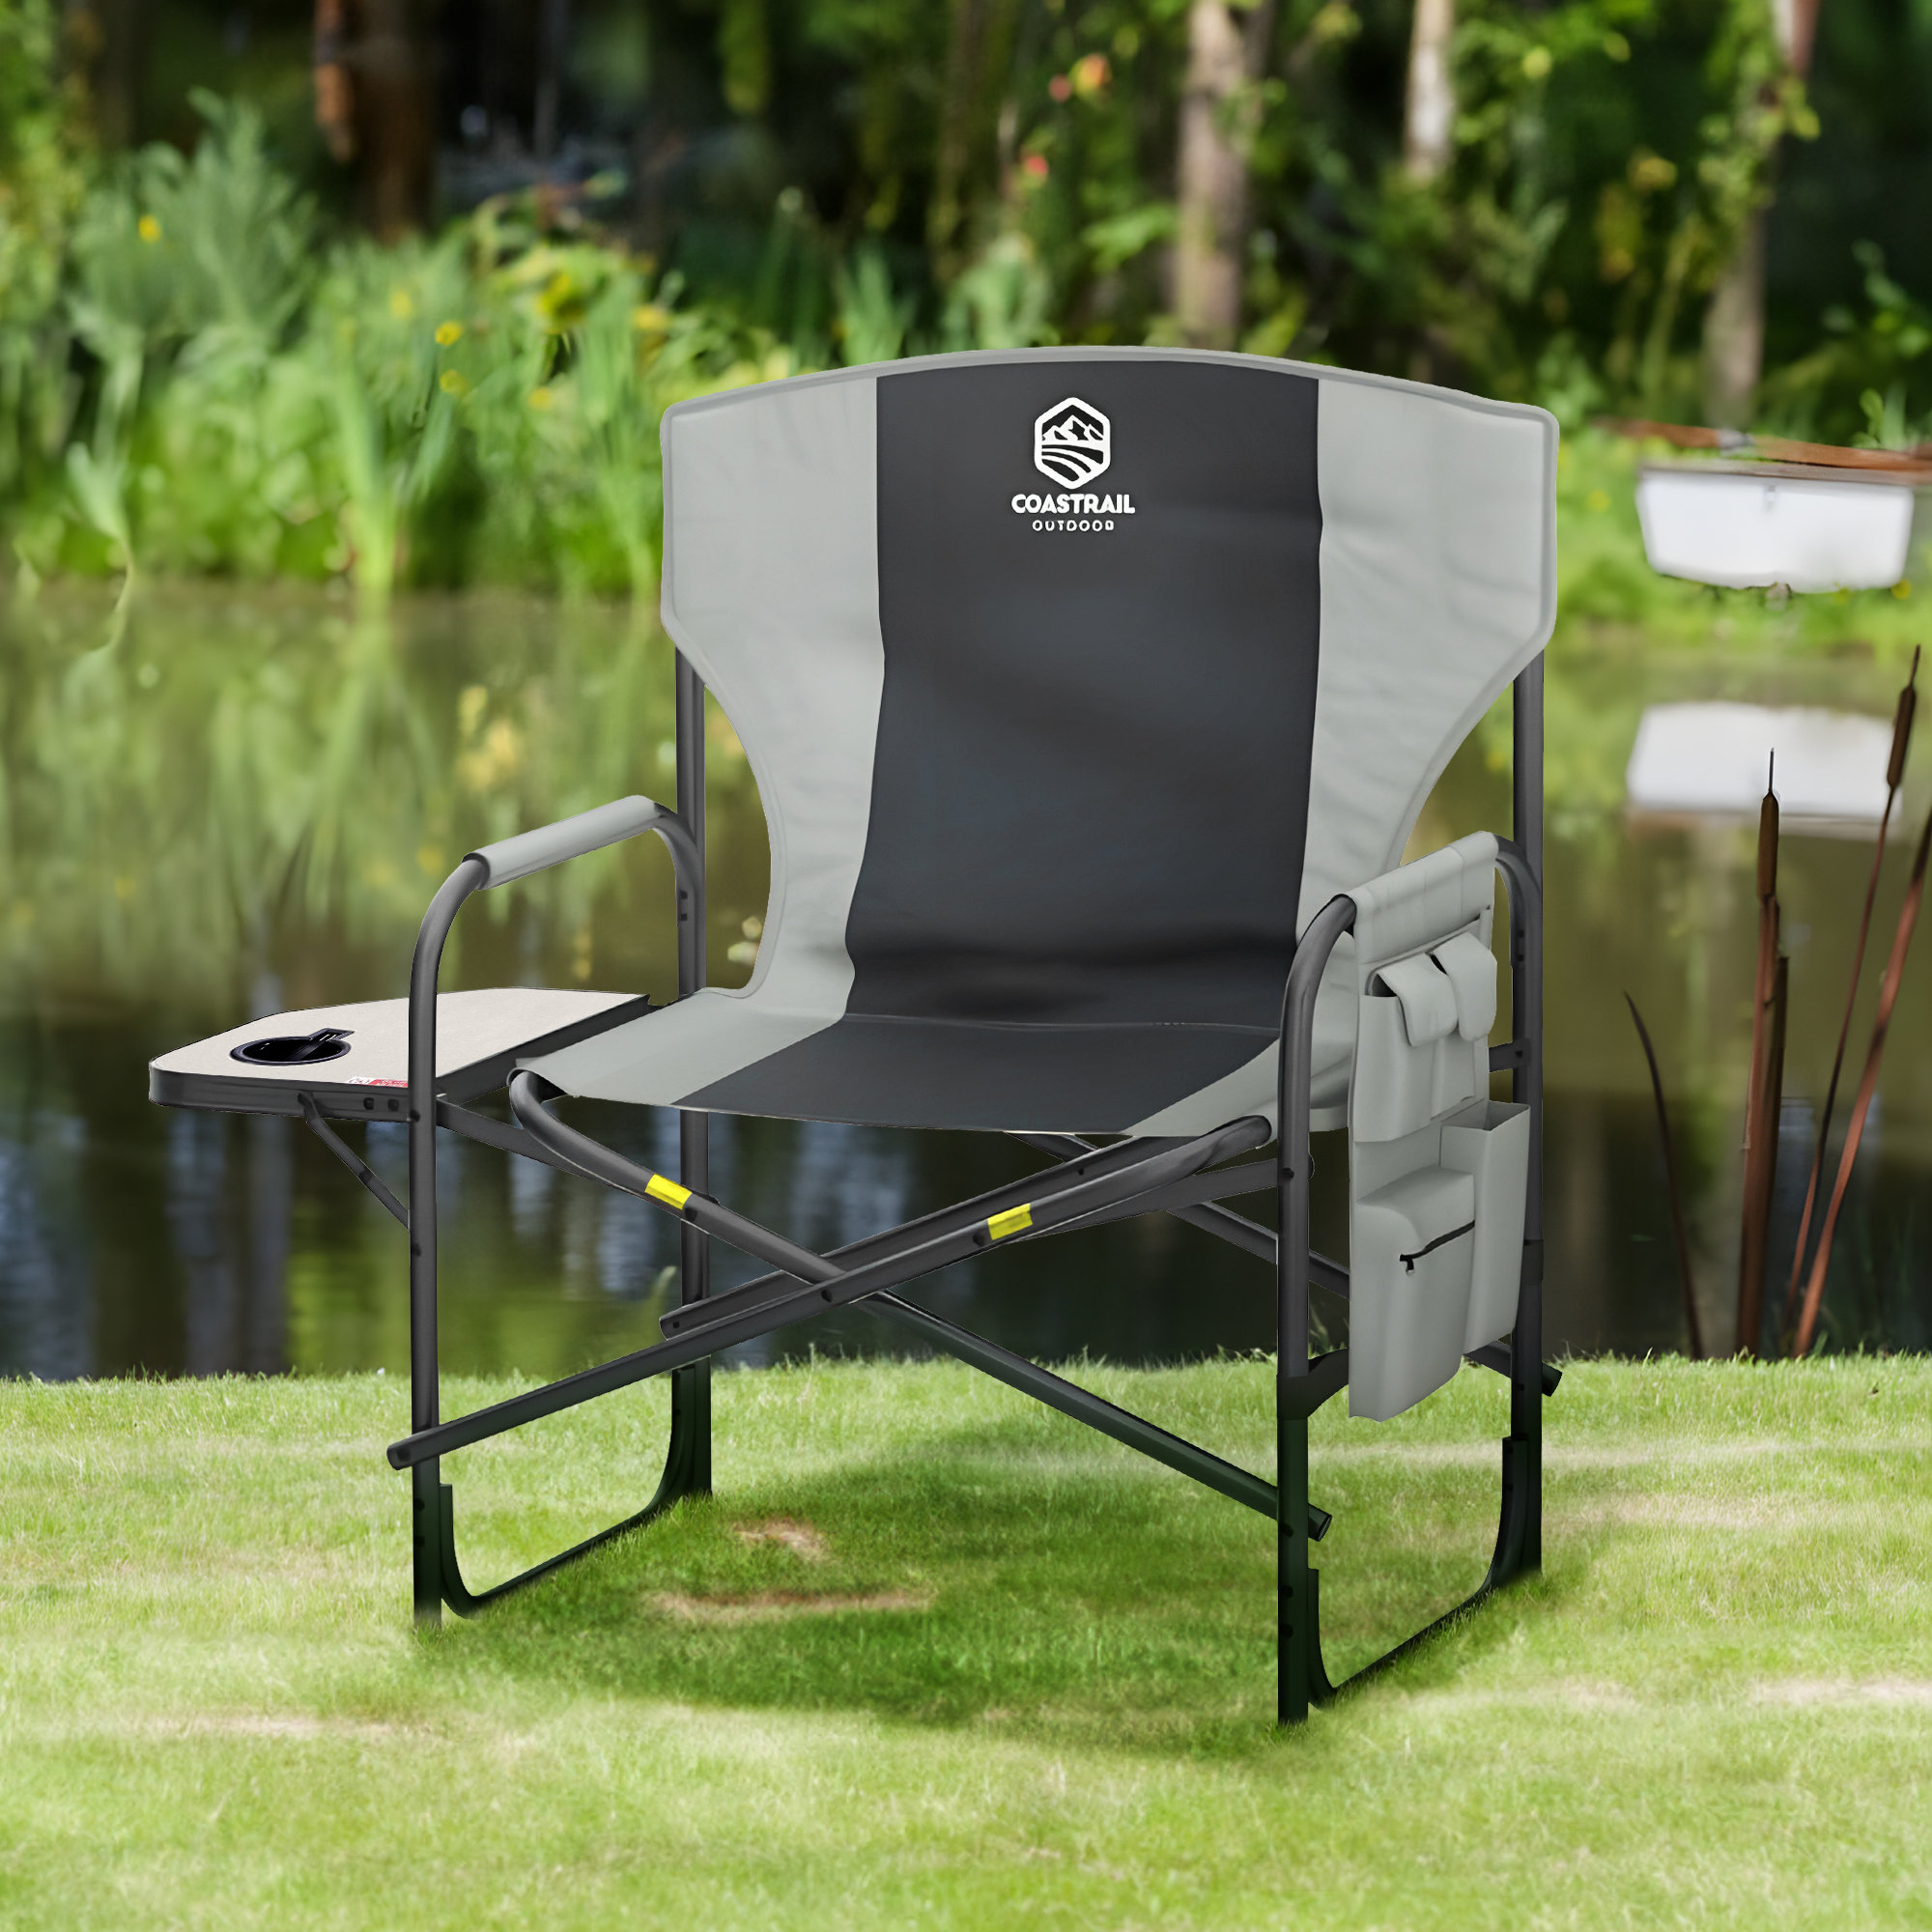 Erwann Oversized Padded Camping Folding Chair with Cup Holder Freeport Park Fabric Color: Black/Gray